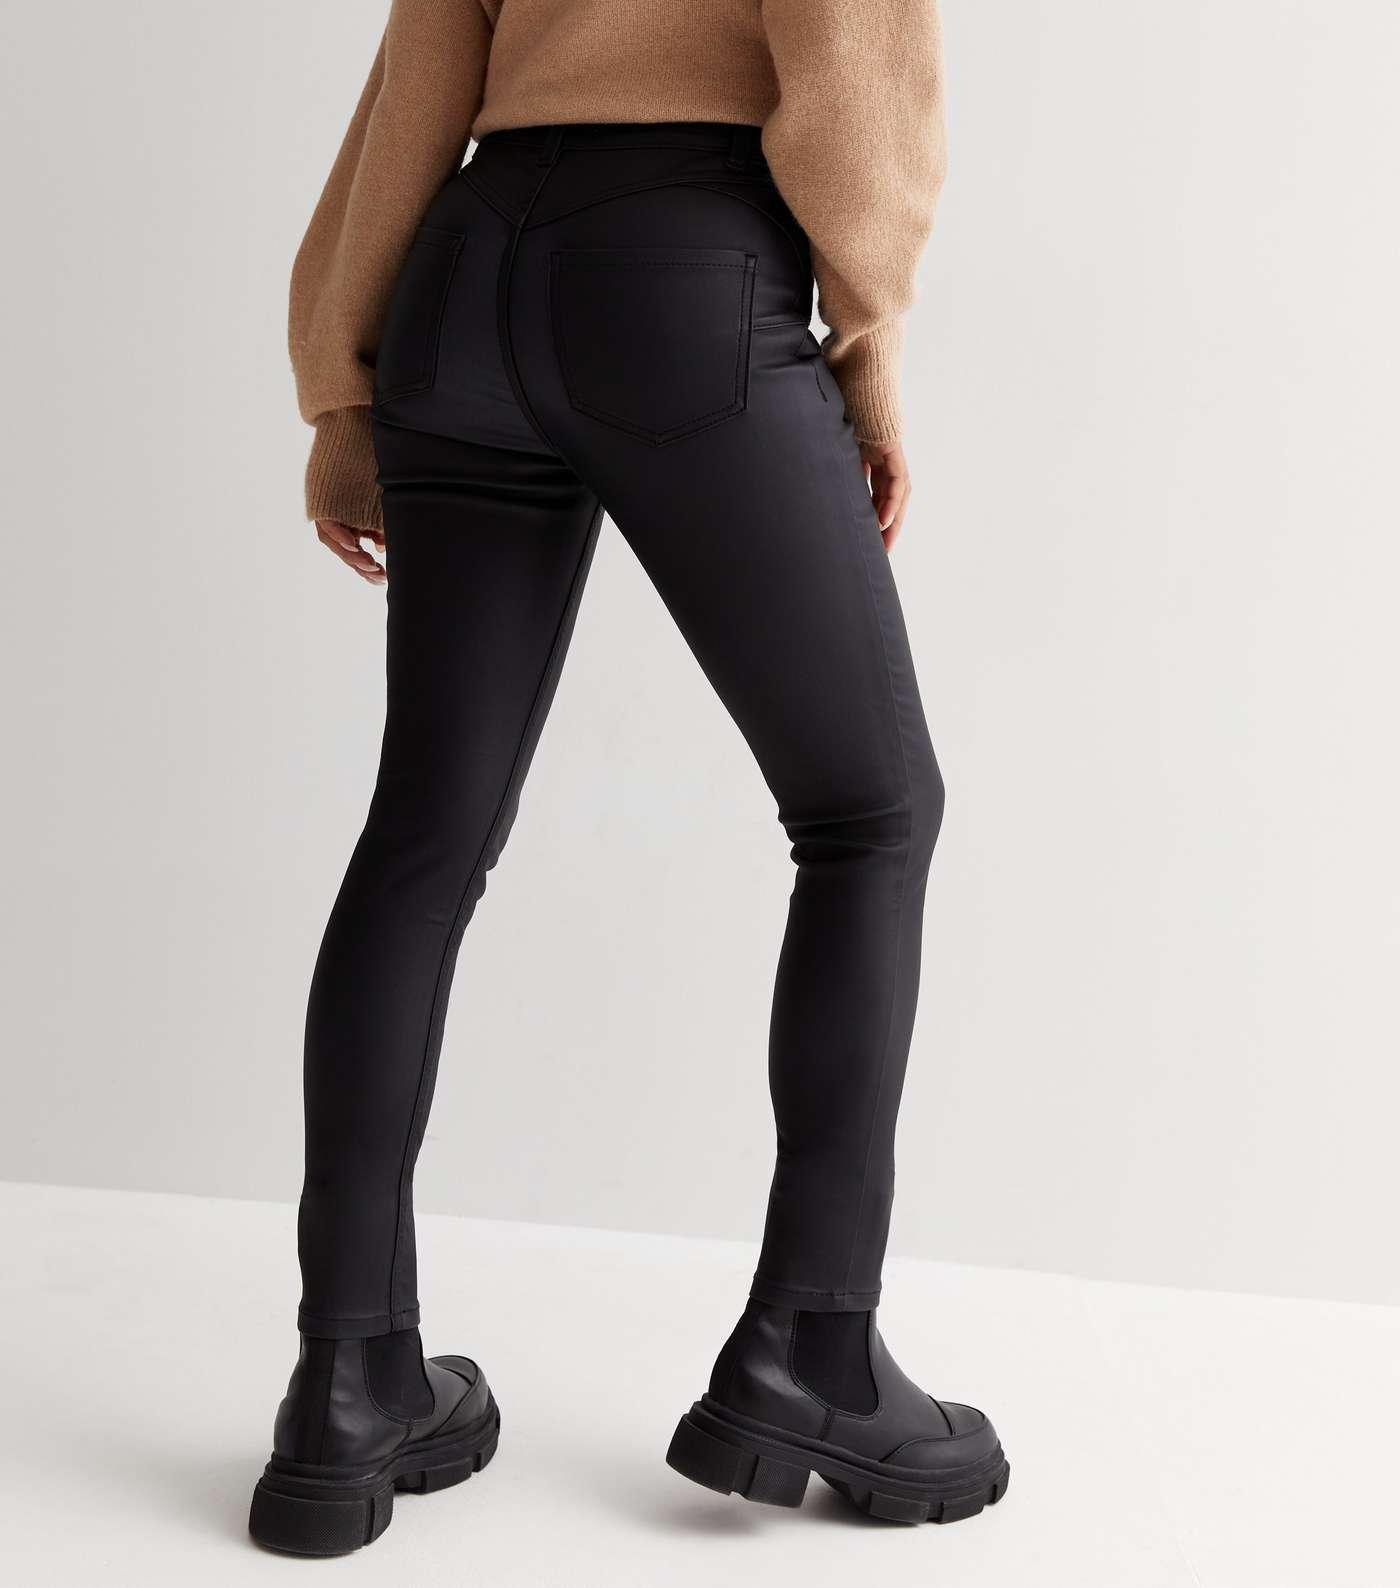 Urban Bliss Black Coated Leather-Look Skinny Jeans